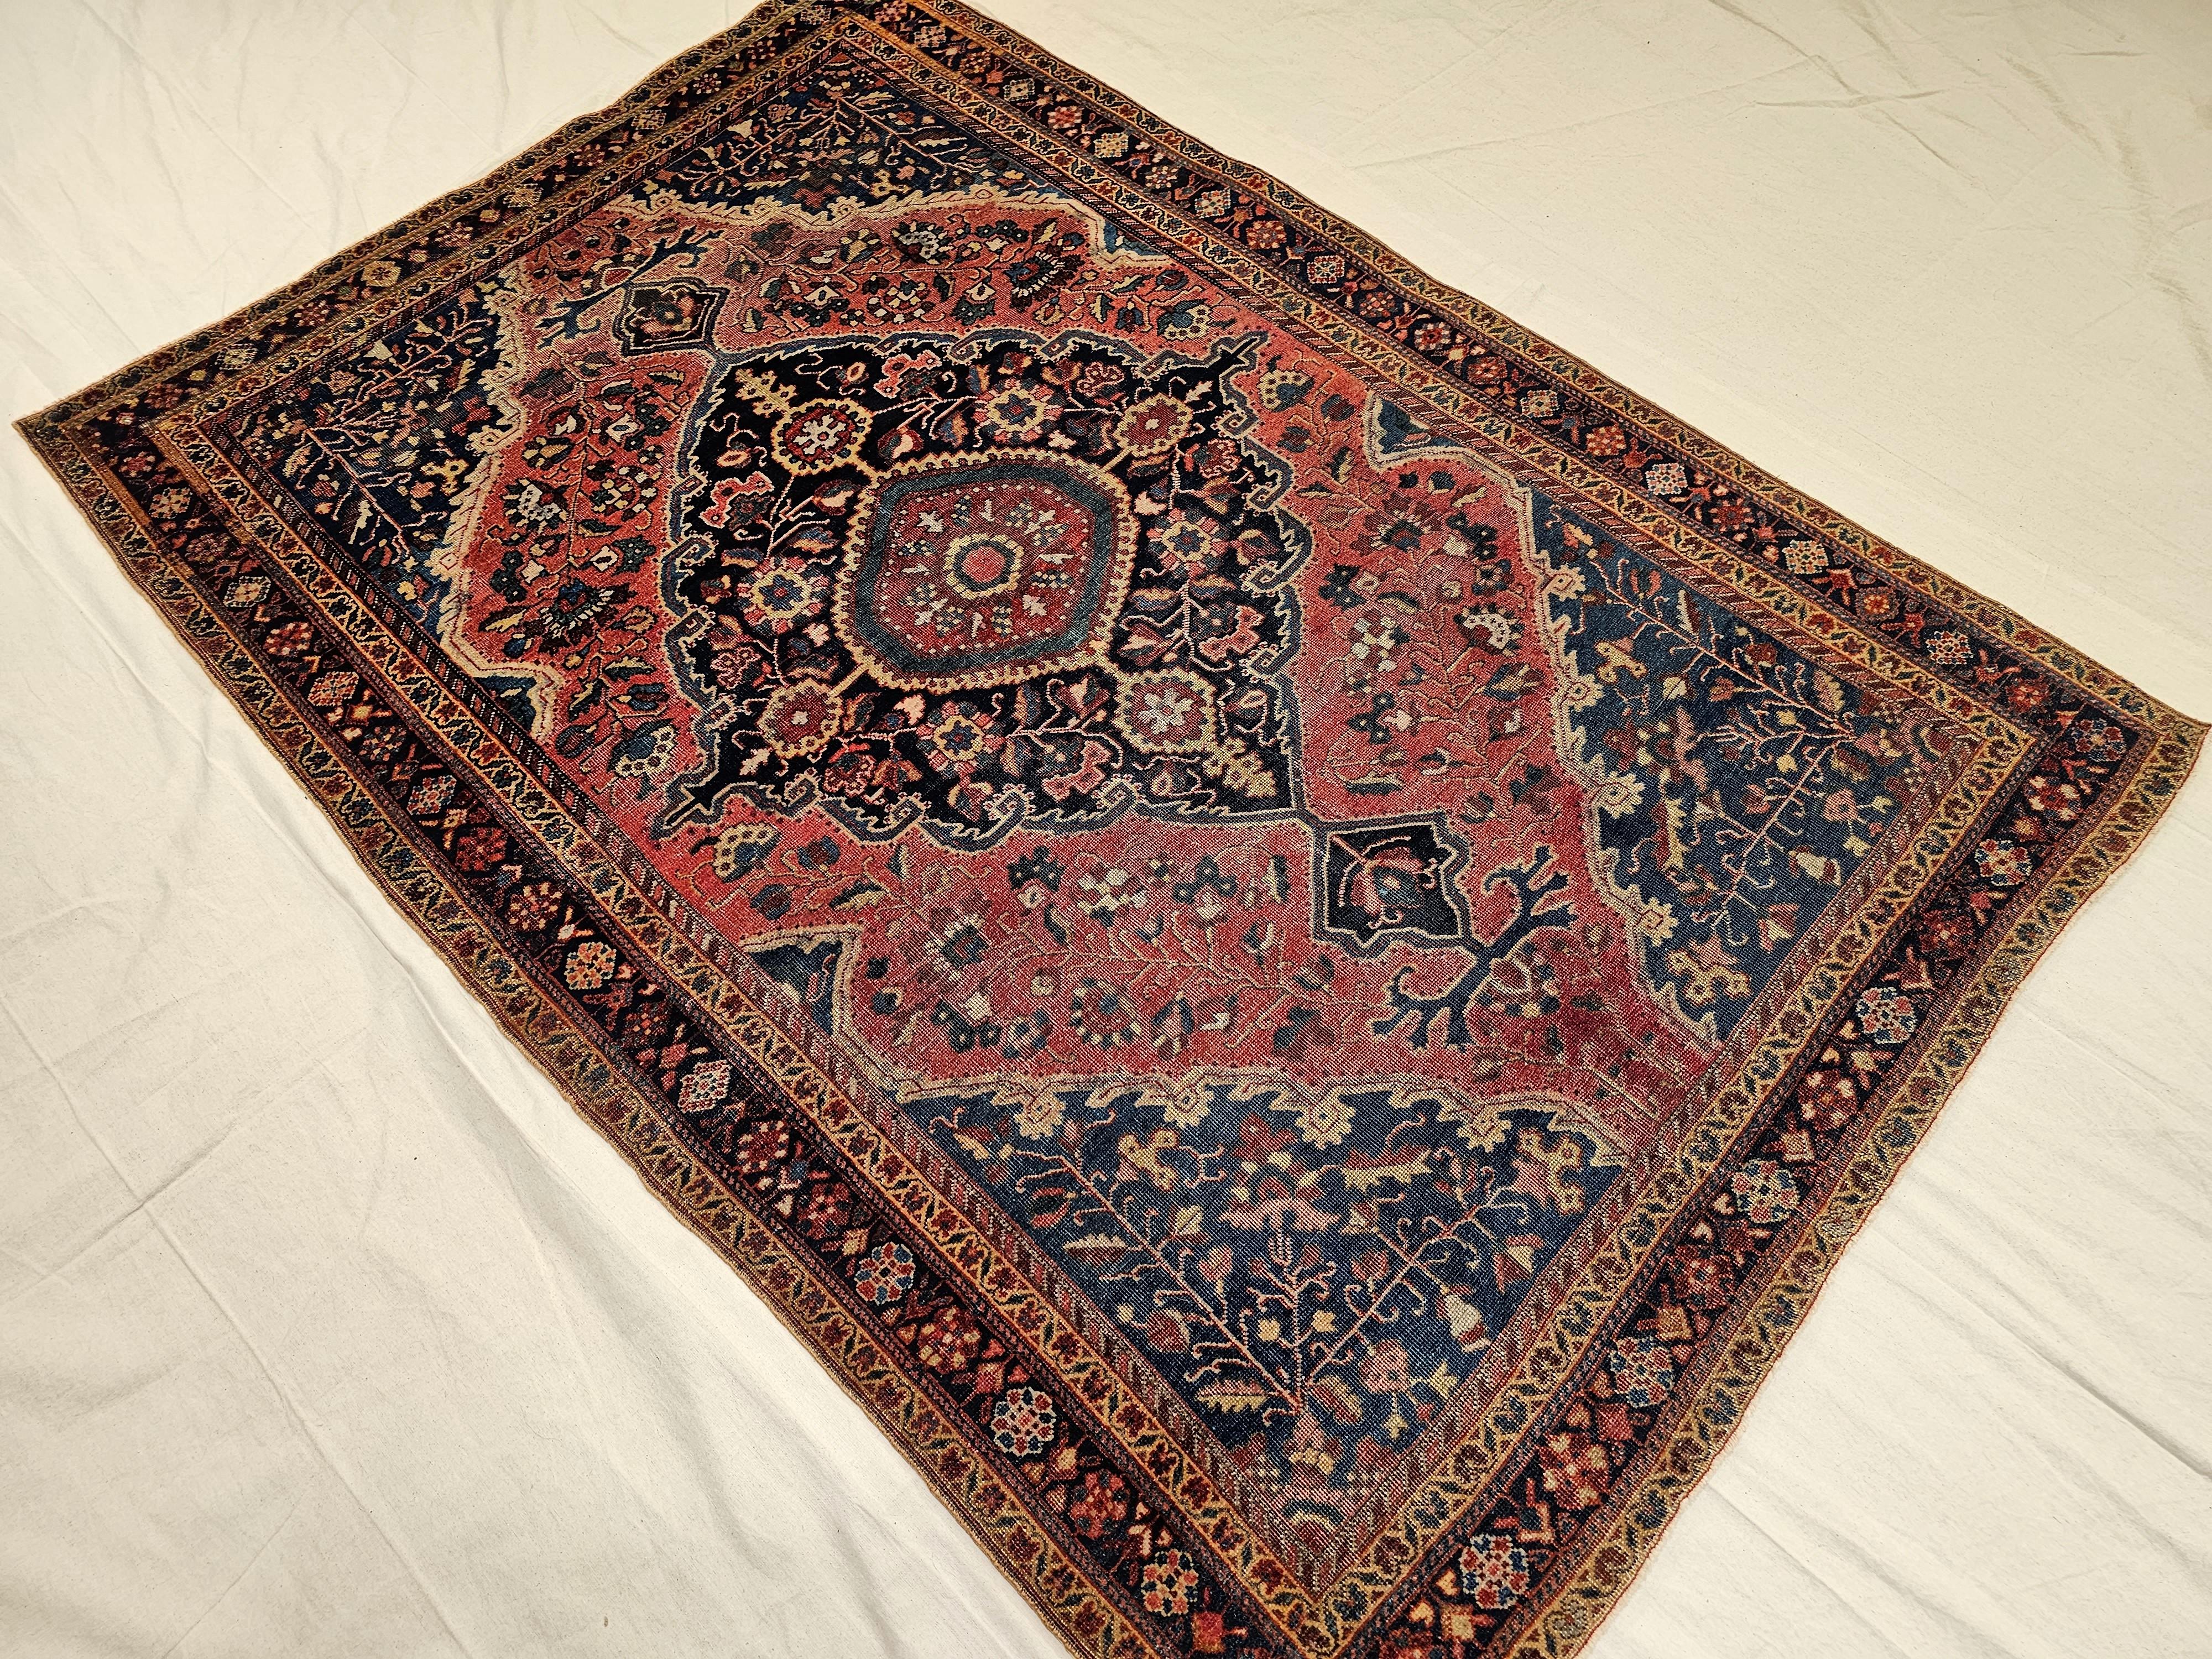 19th Century Persian Farahan Sarouk Area Rug in Rust Red, French Blue, Navy Blue For Sale 1